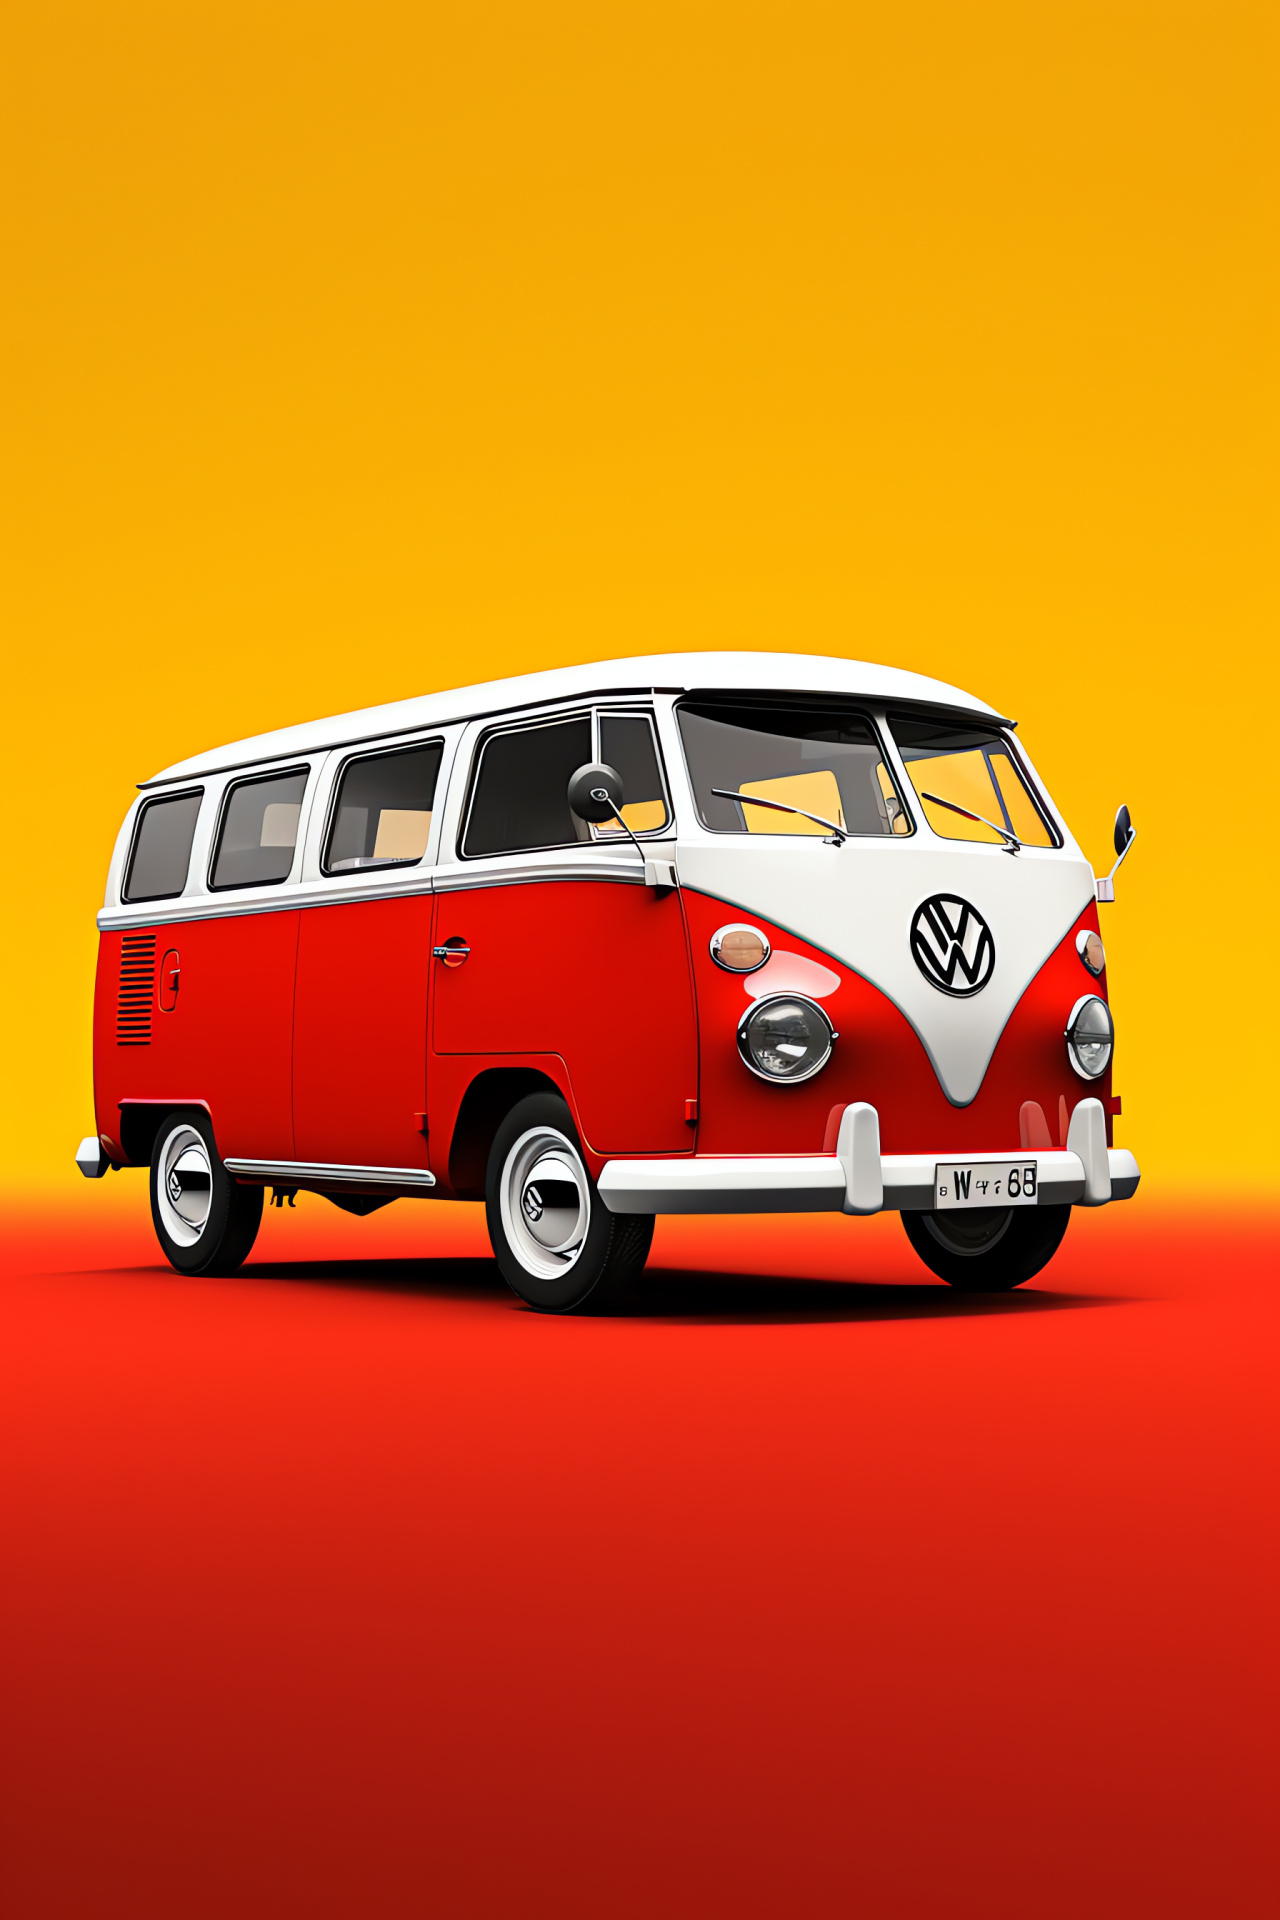 VW Bus T1 Pick-Up, vibrant appearance, classic utility, crisp yellow aesthetic, transport legacy, HD Phone Image